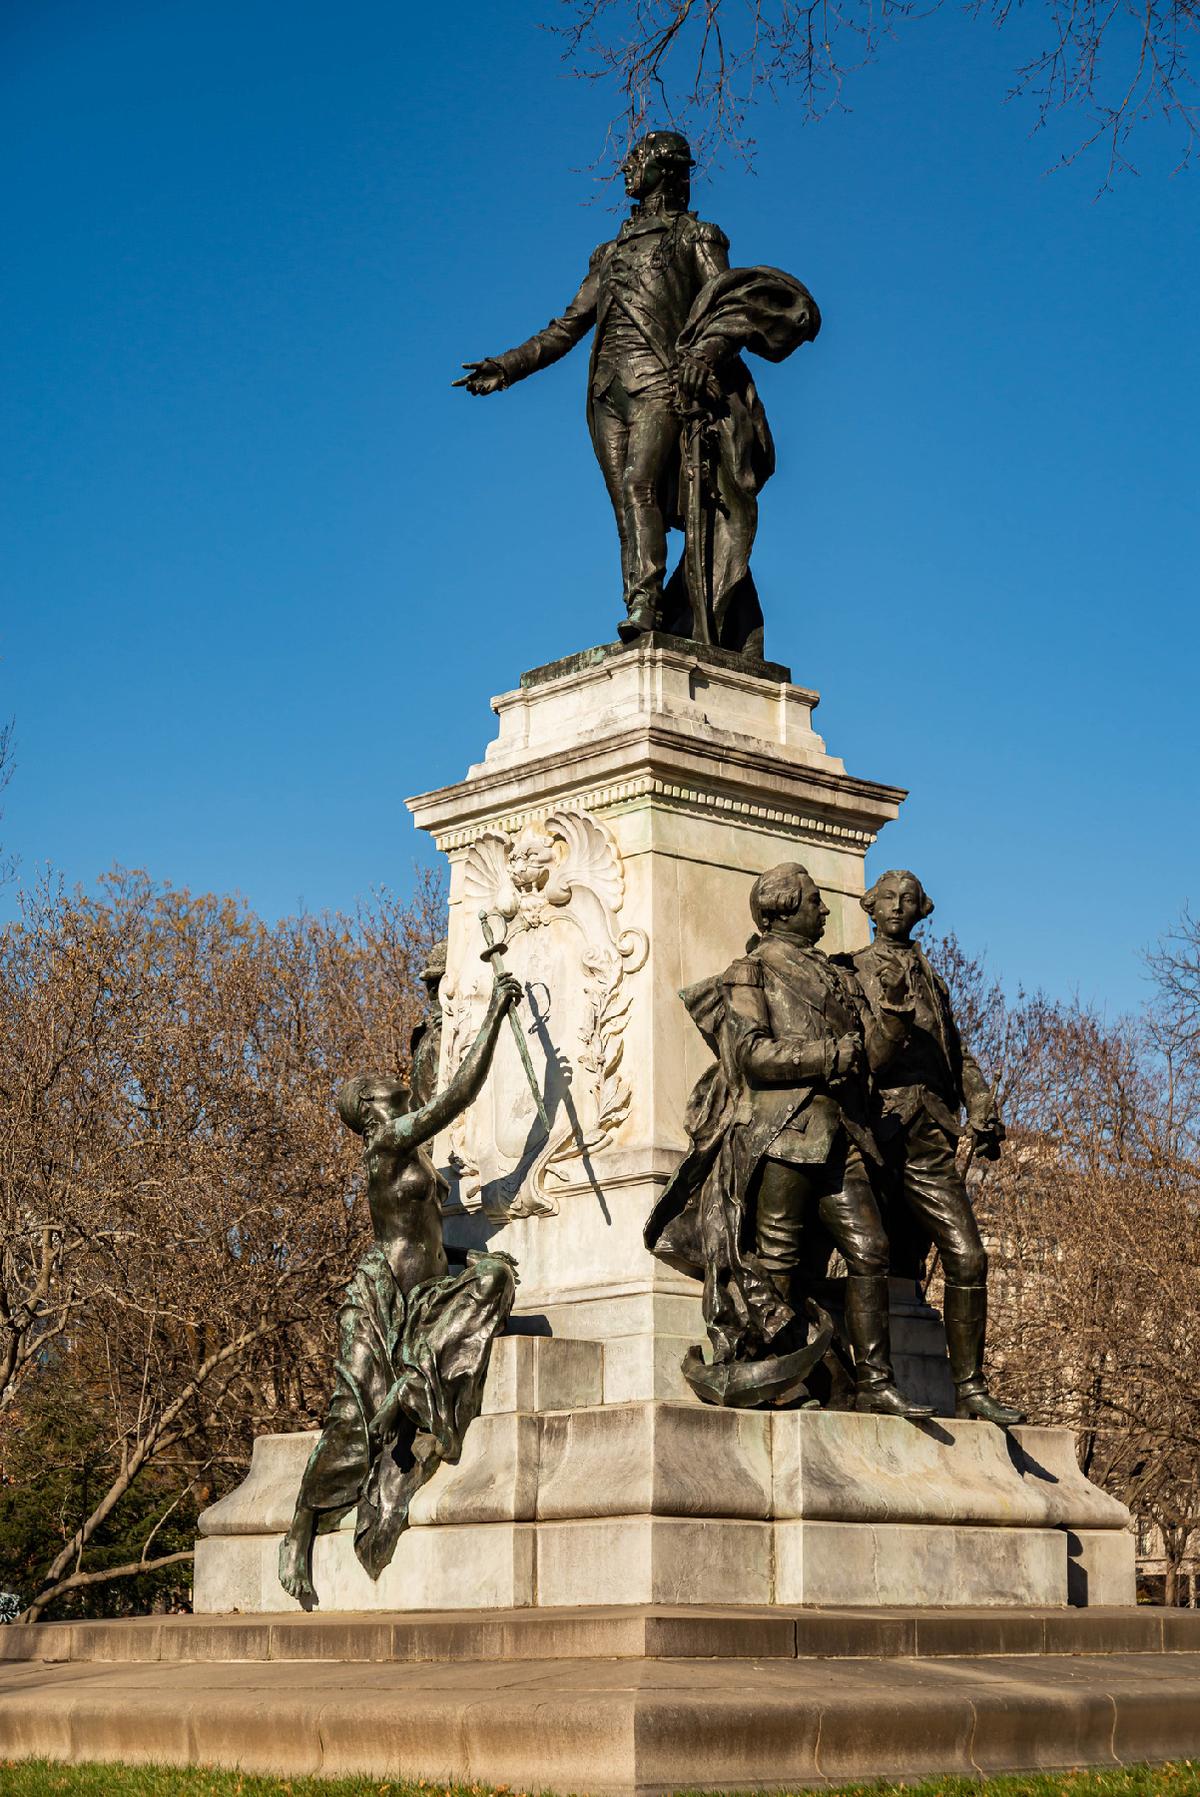 Thaddeus Kosciuszko, a Polish engineer who aided the Colonists during the Revolutionary War, is honored at a park in Philadelphia, Pa., the smallest in the National Park System. (Enrico Della Pietra/Dreamstime.com.)